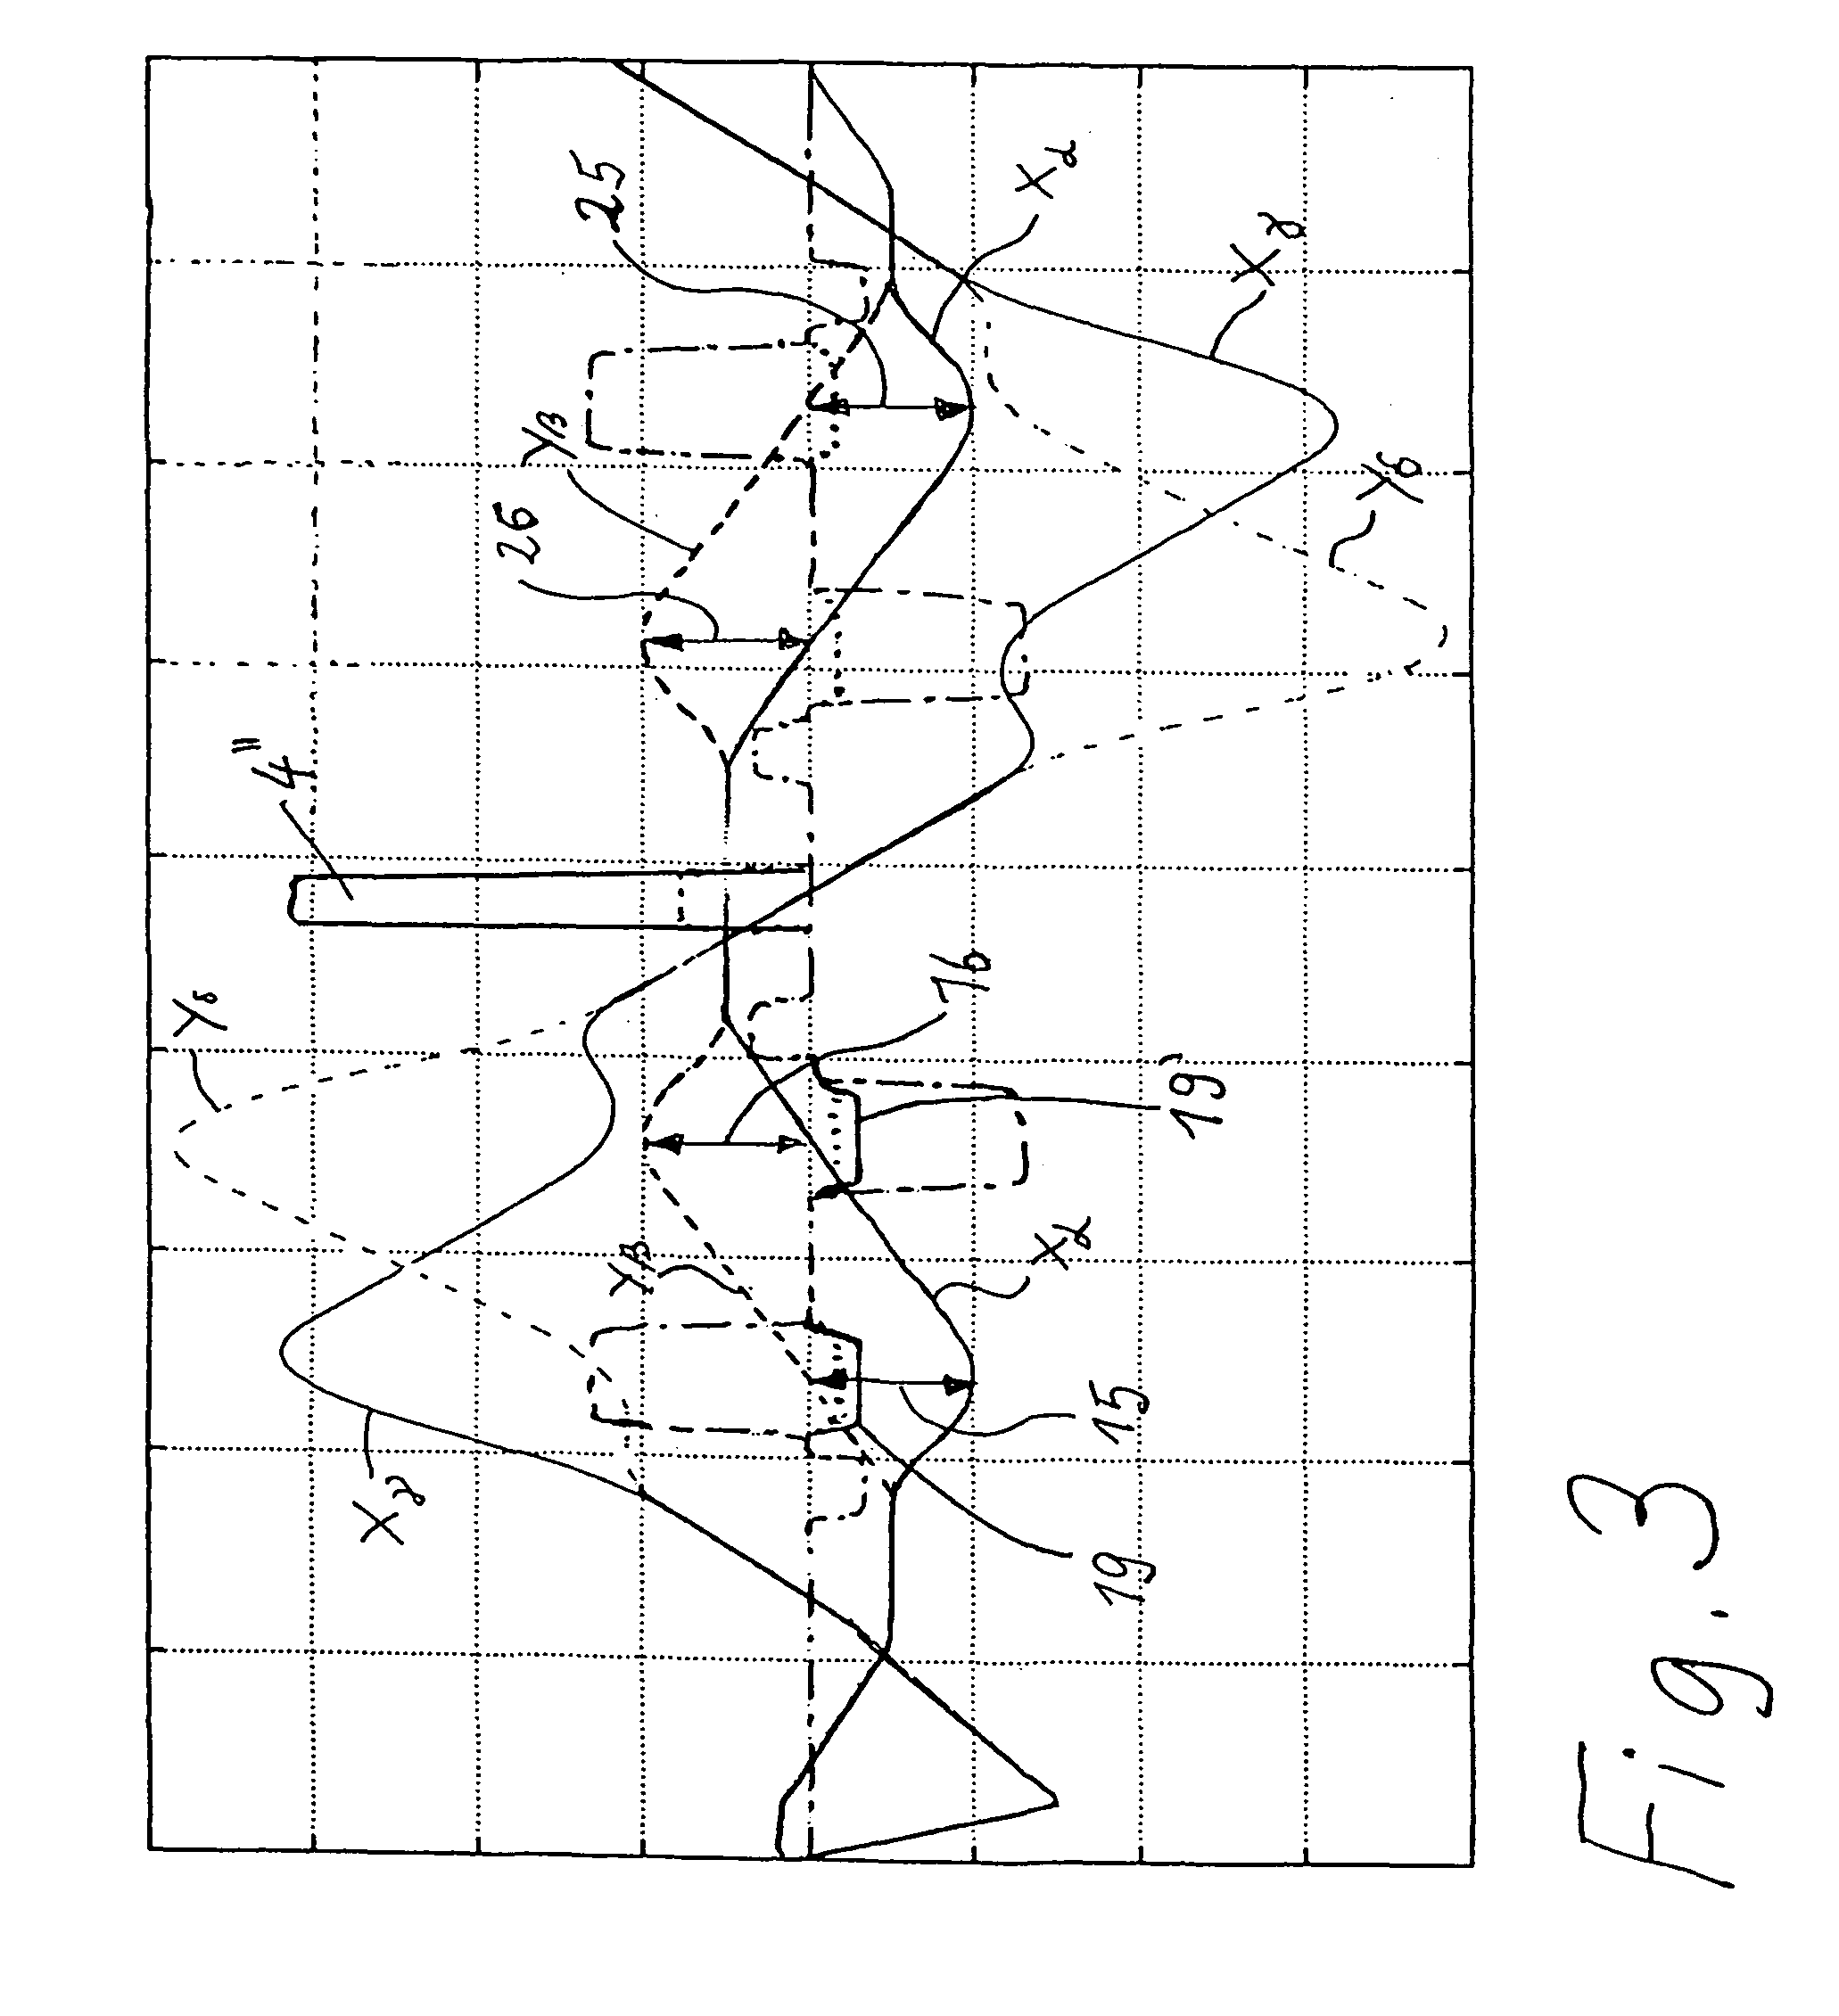 Corrector for axial and off-axial beam paths